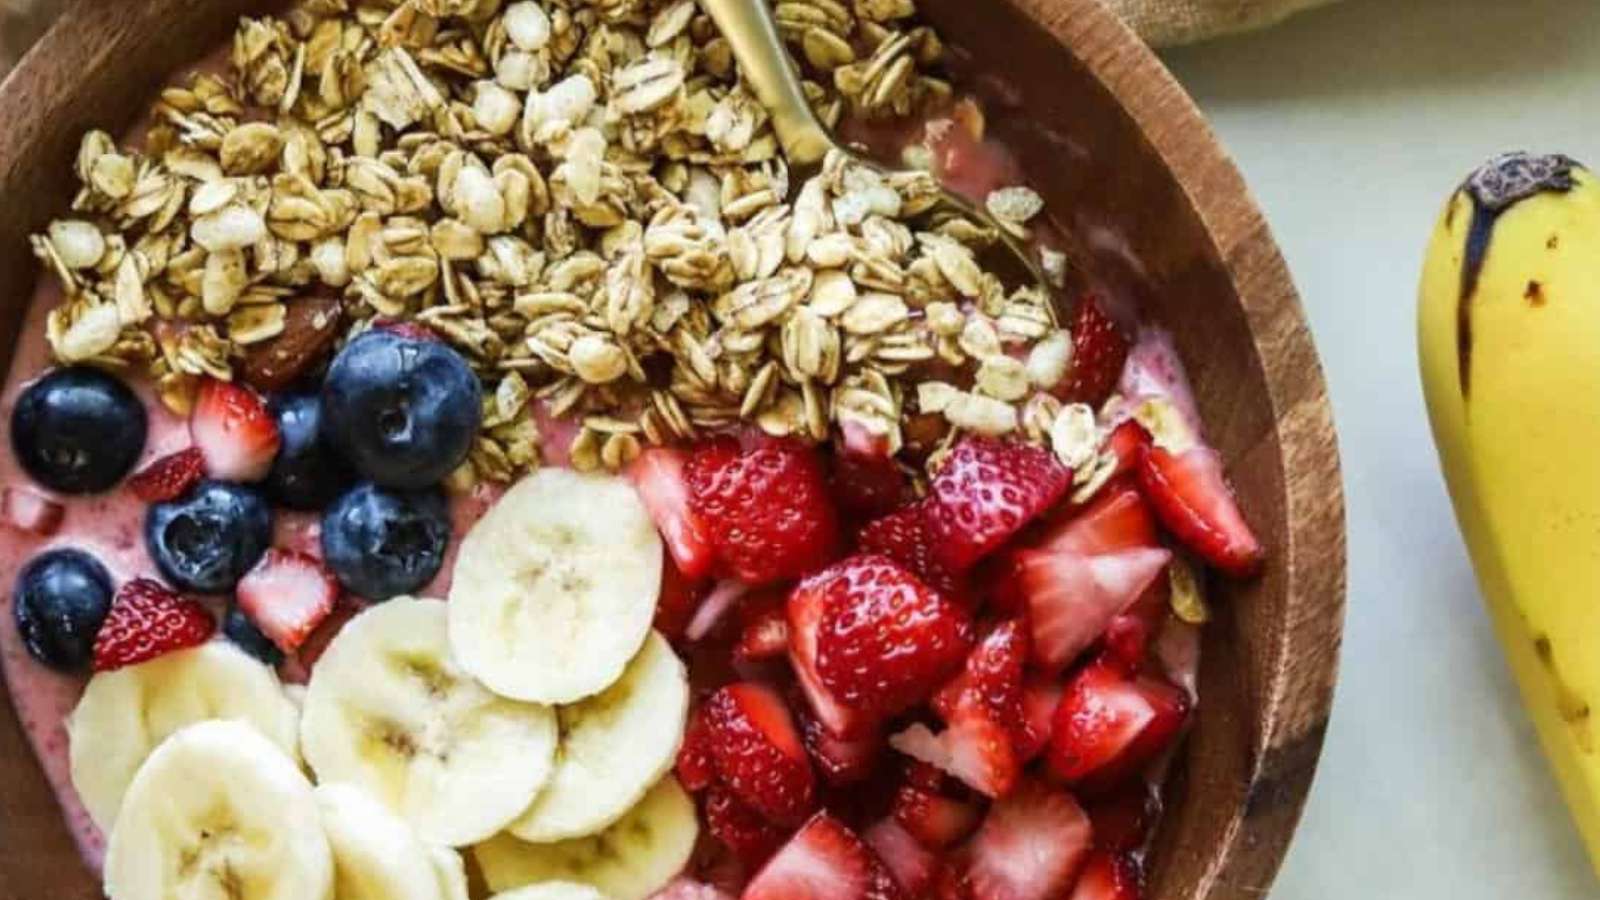 A bowl of fruit and granola with bananas and berries.